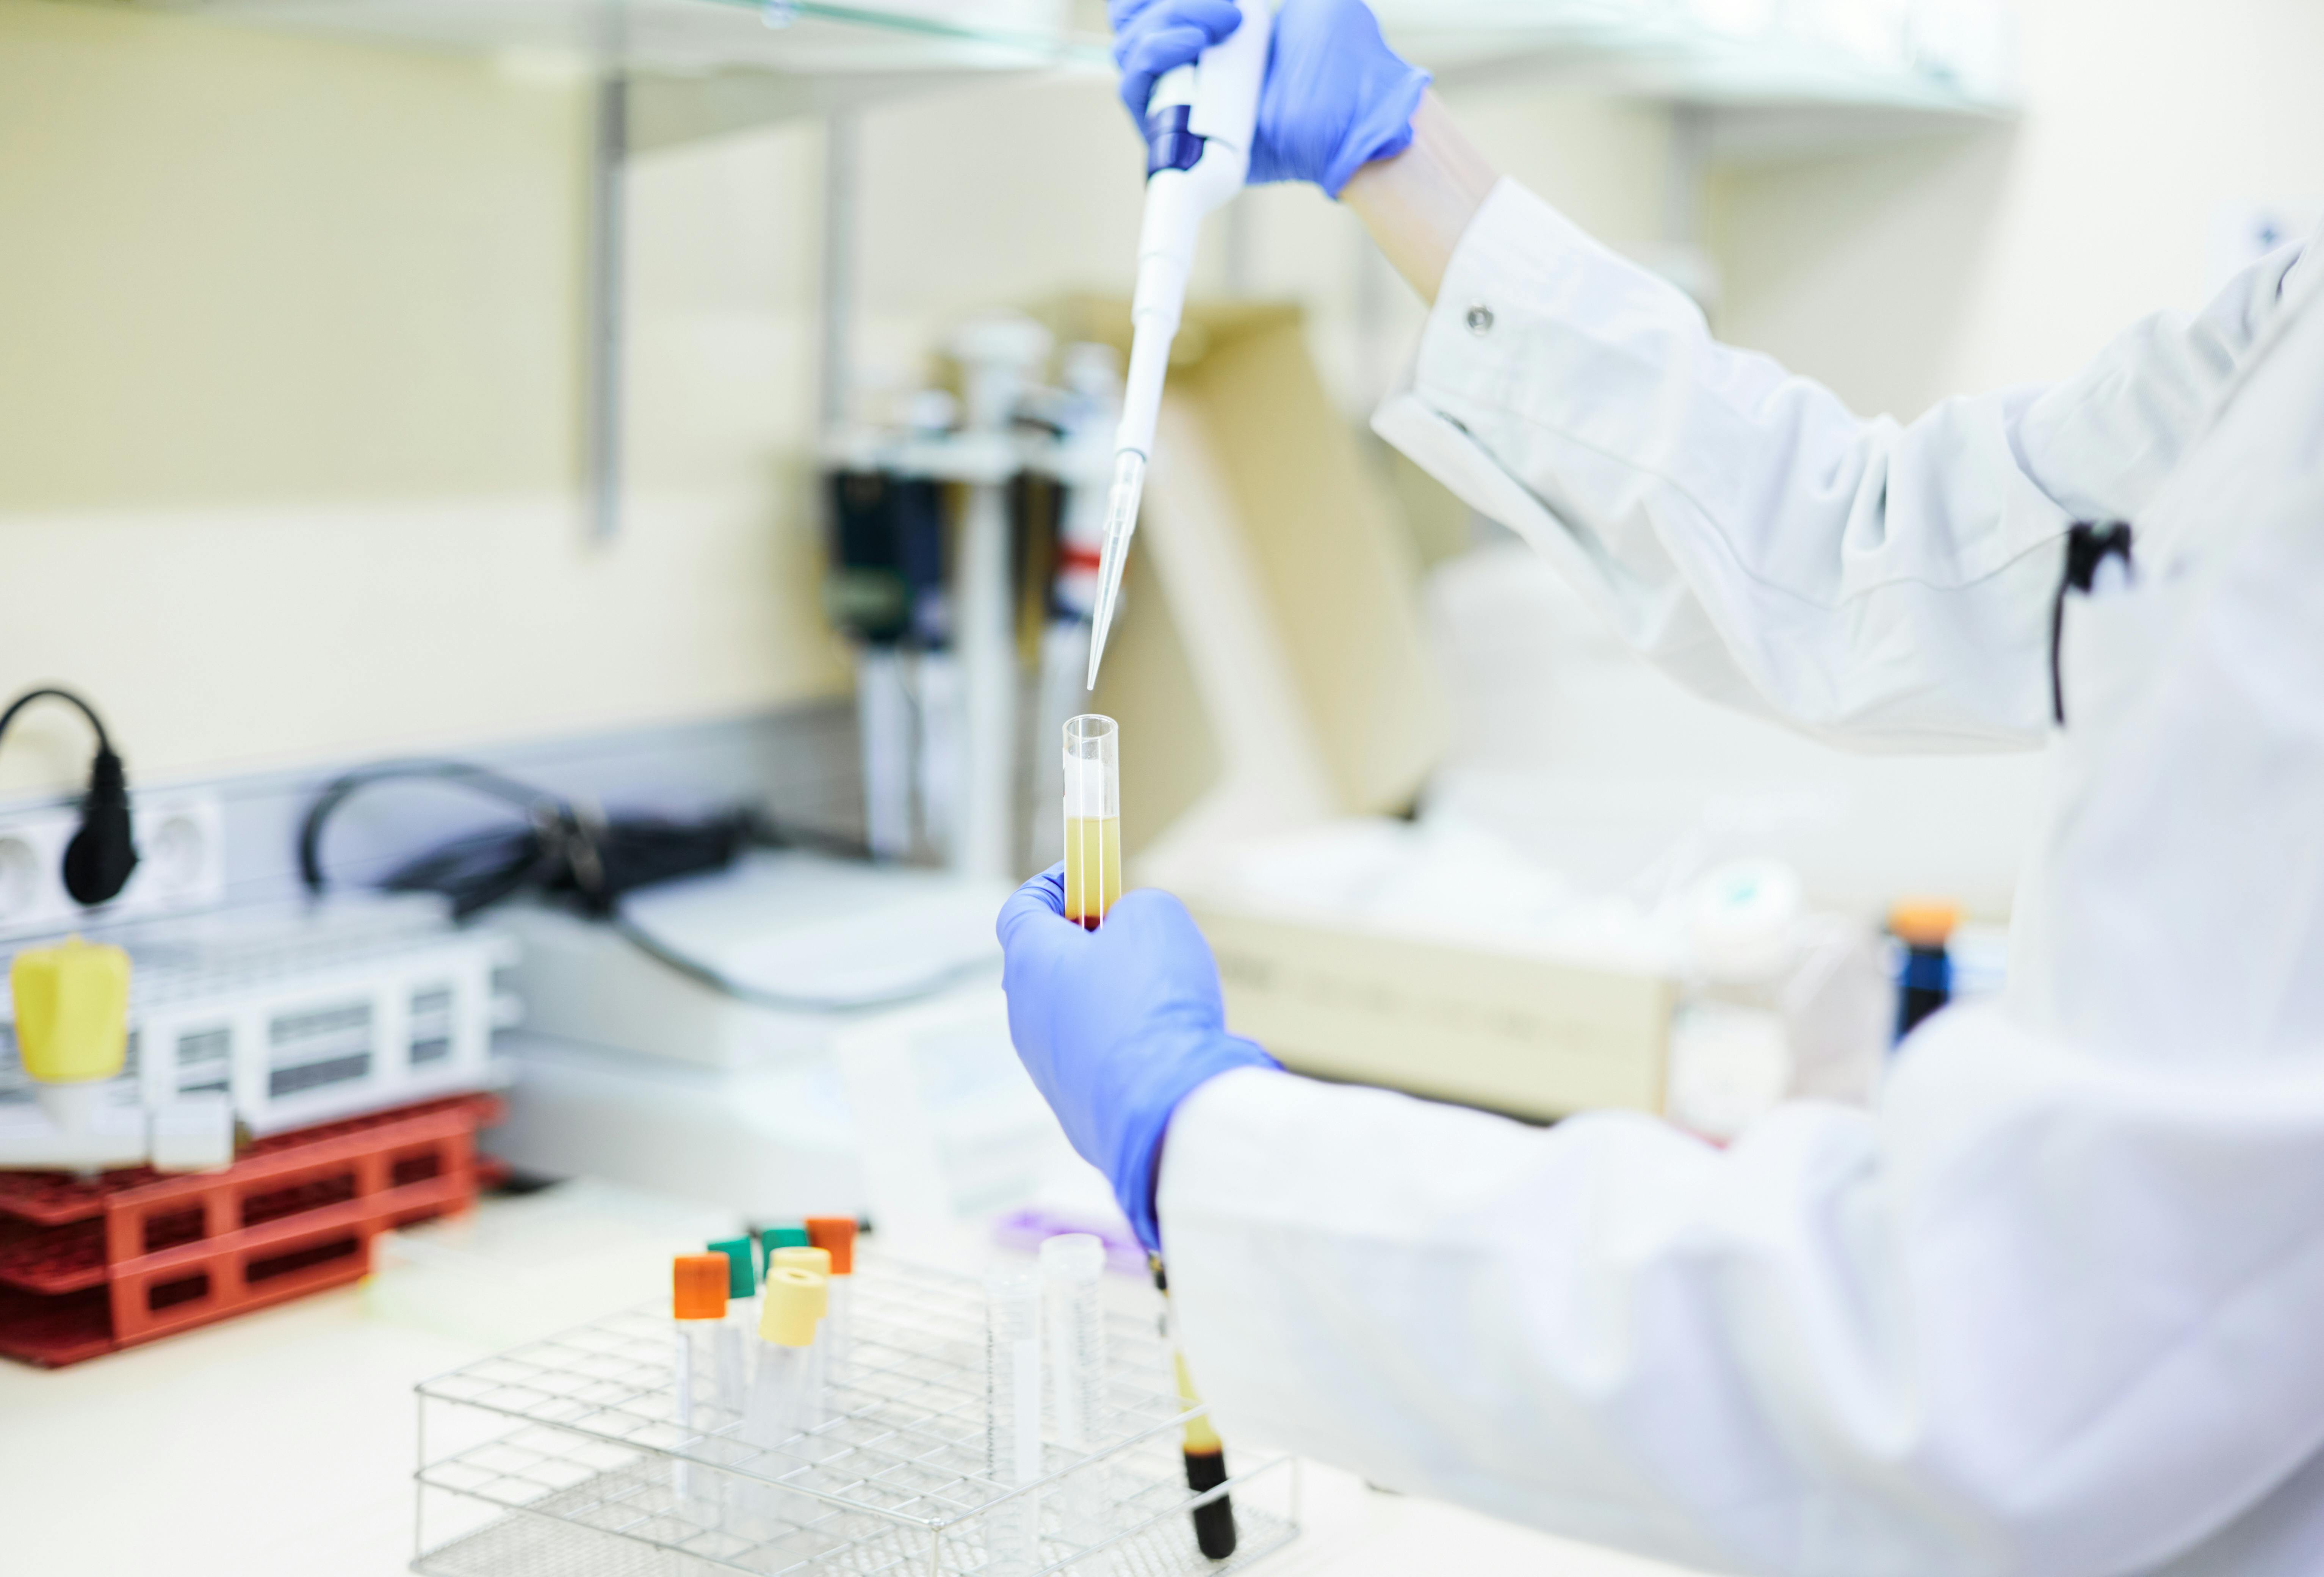 A scientist analyses a blood sample with a pipette in the laboratory.